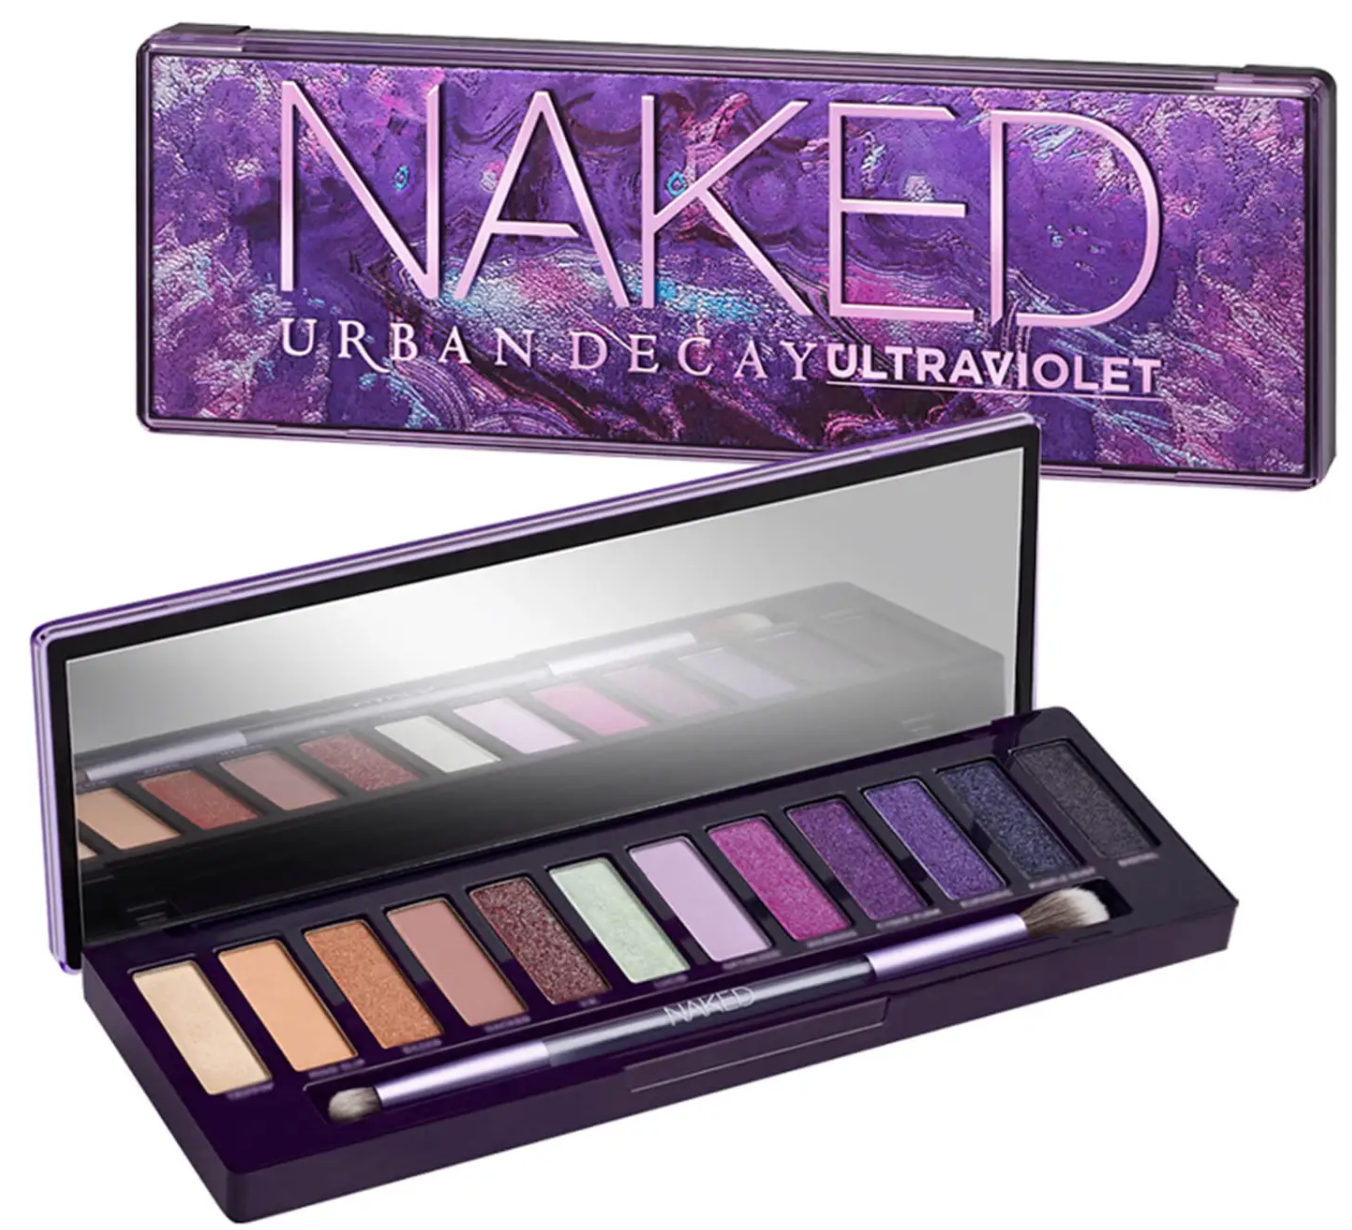 Urban Decay Launches Naked Ultraviolet Eye Shadow Palette — See Photo